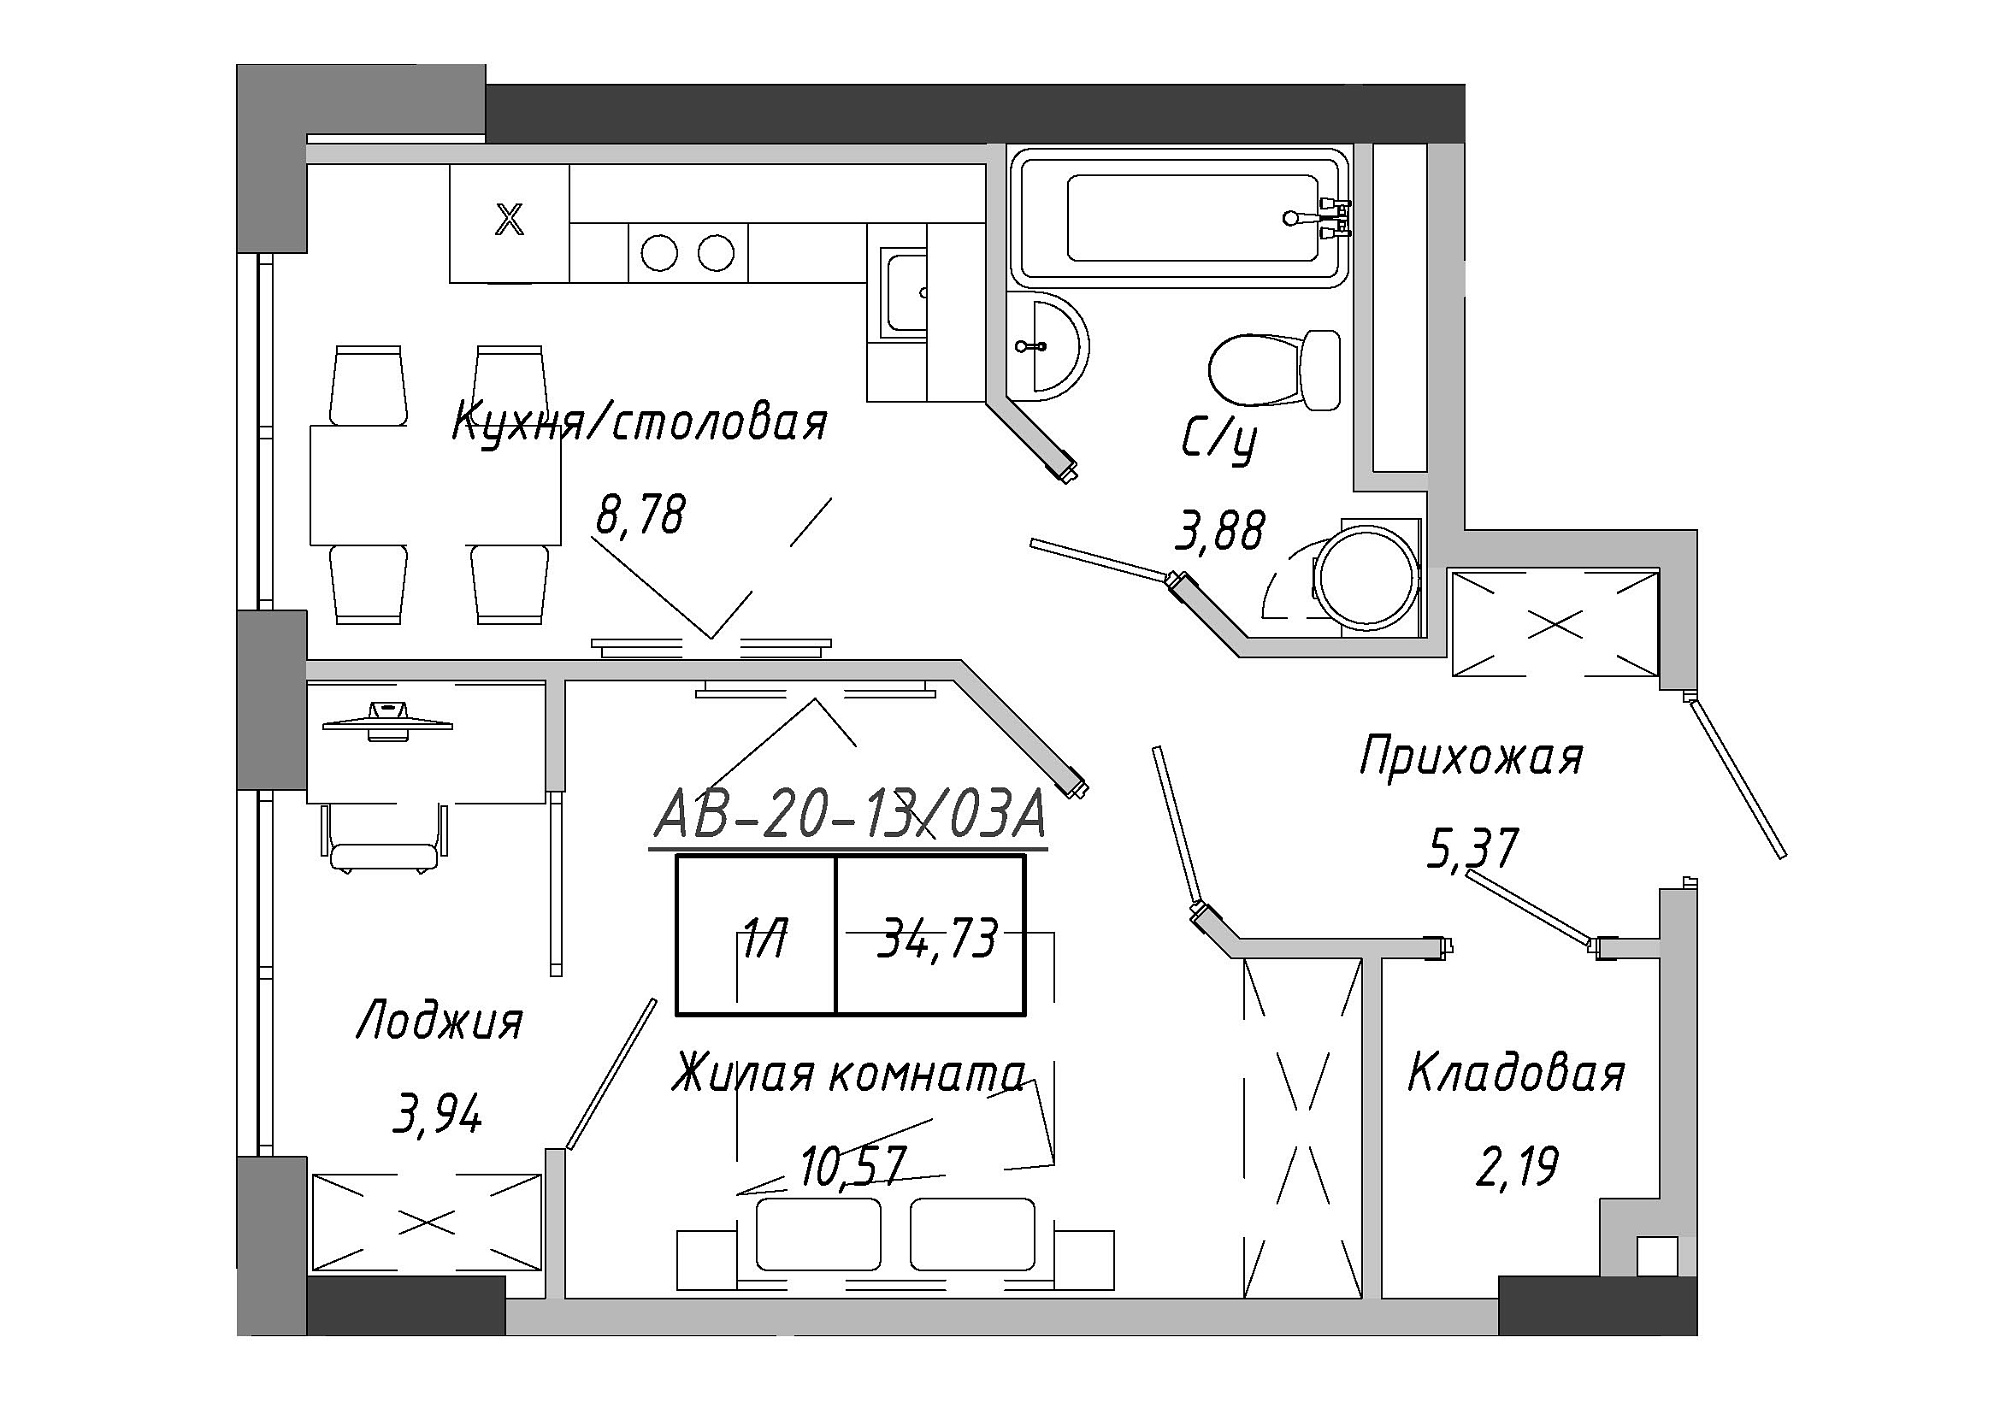 Planning 1-rm flats area 34.73m2, AB-20-13/0103a.